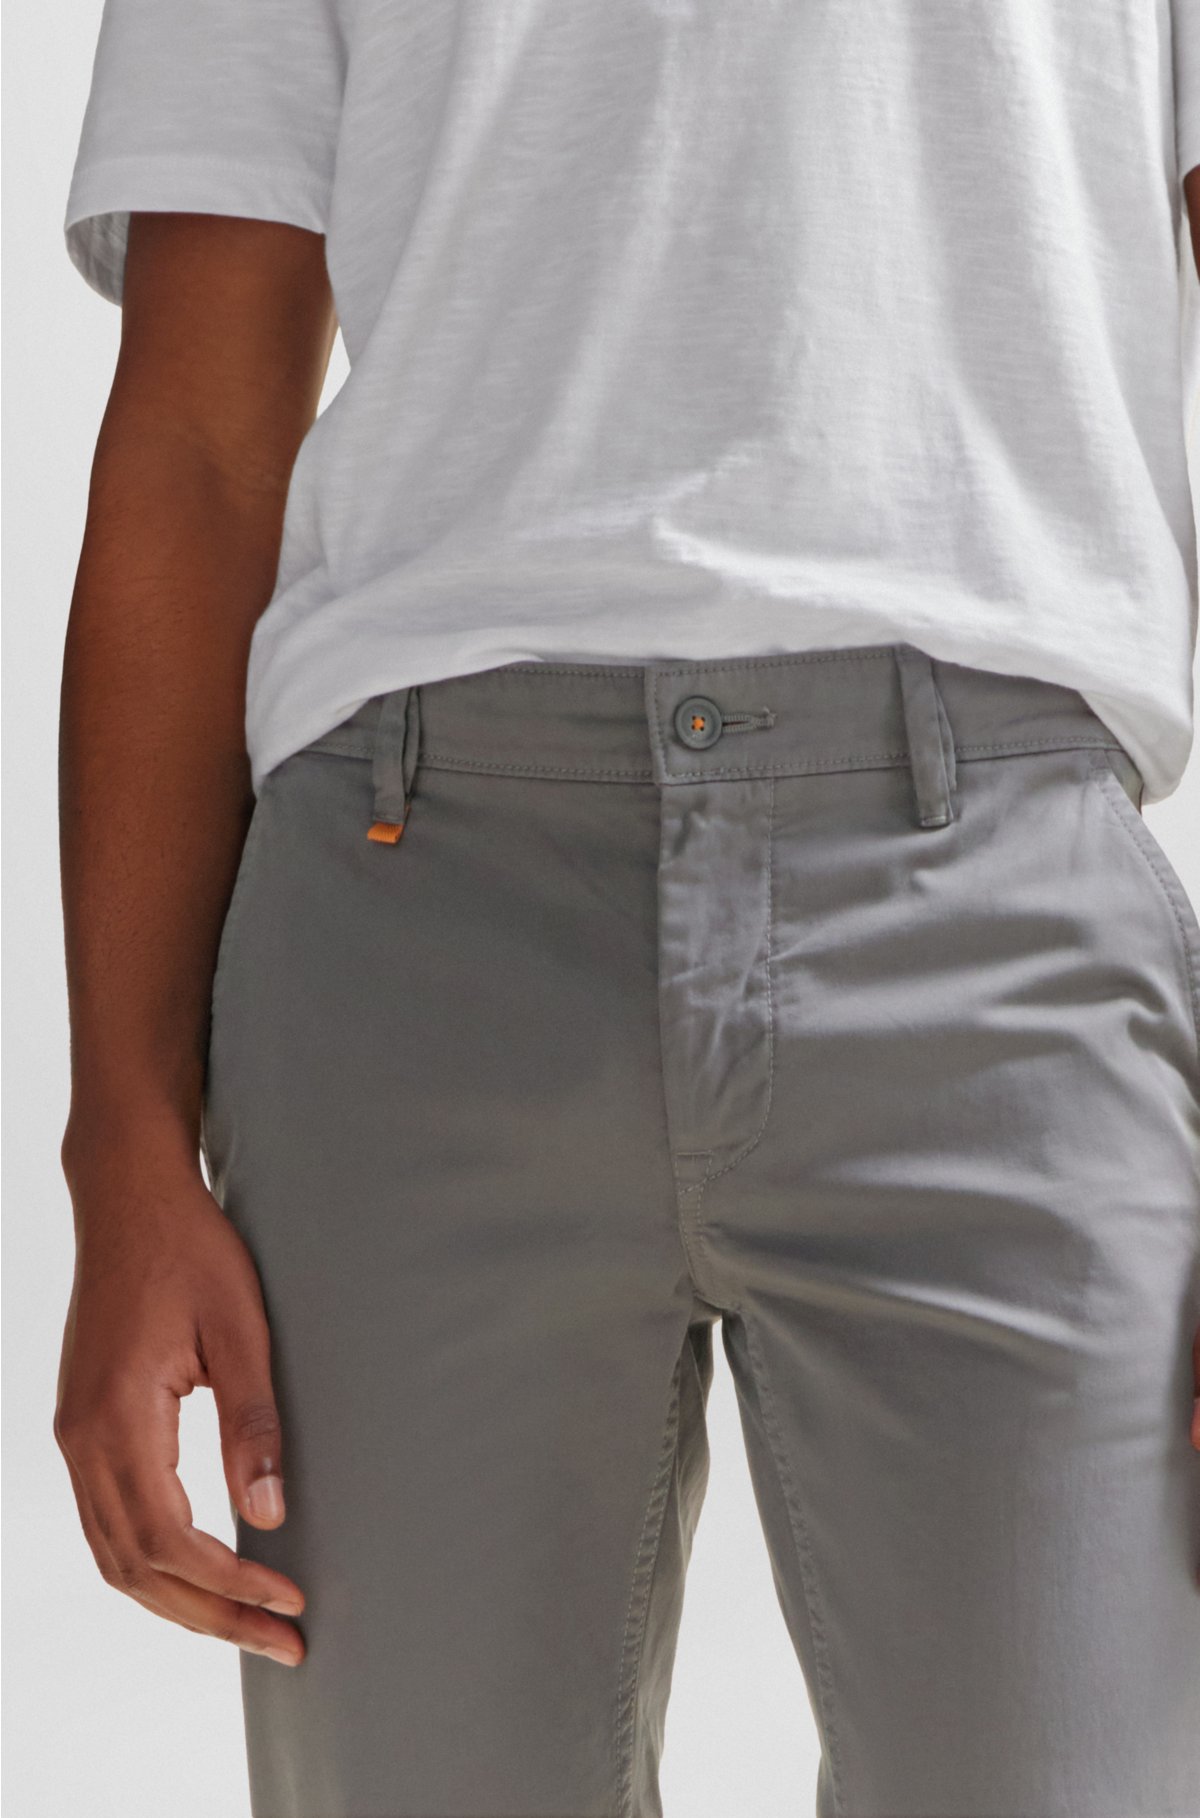 BOSS - Slim-fit trousers in a cotton blend with stretch